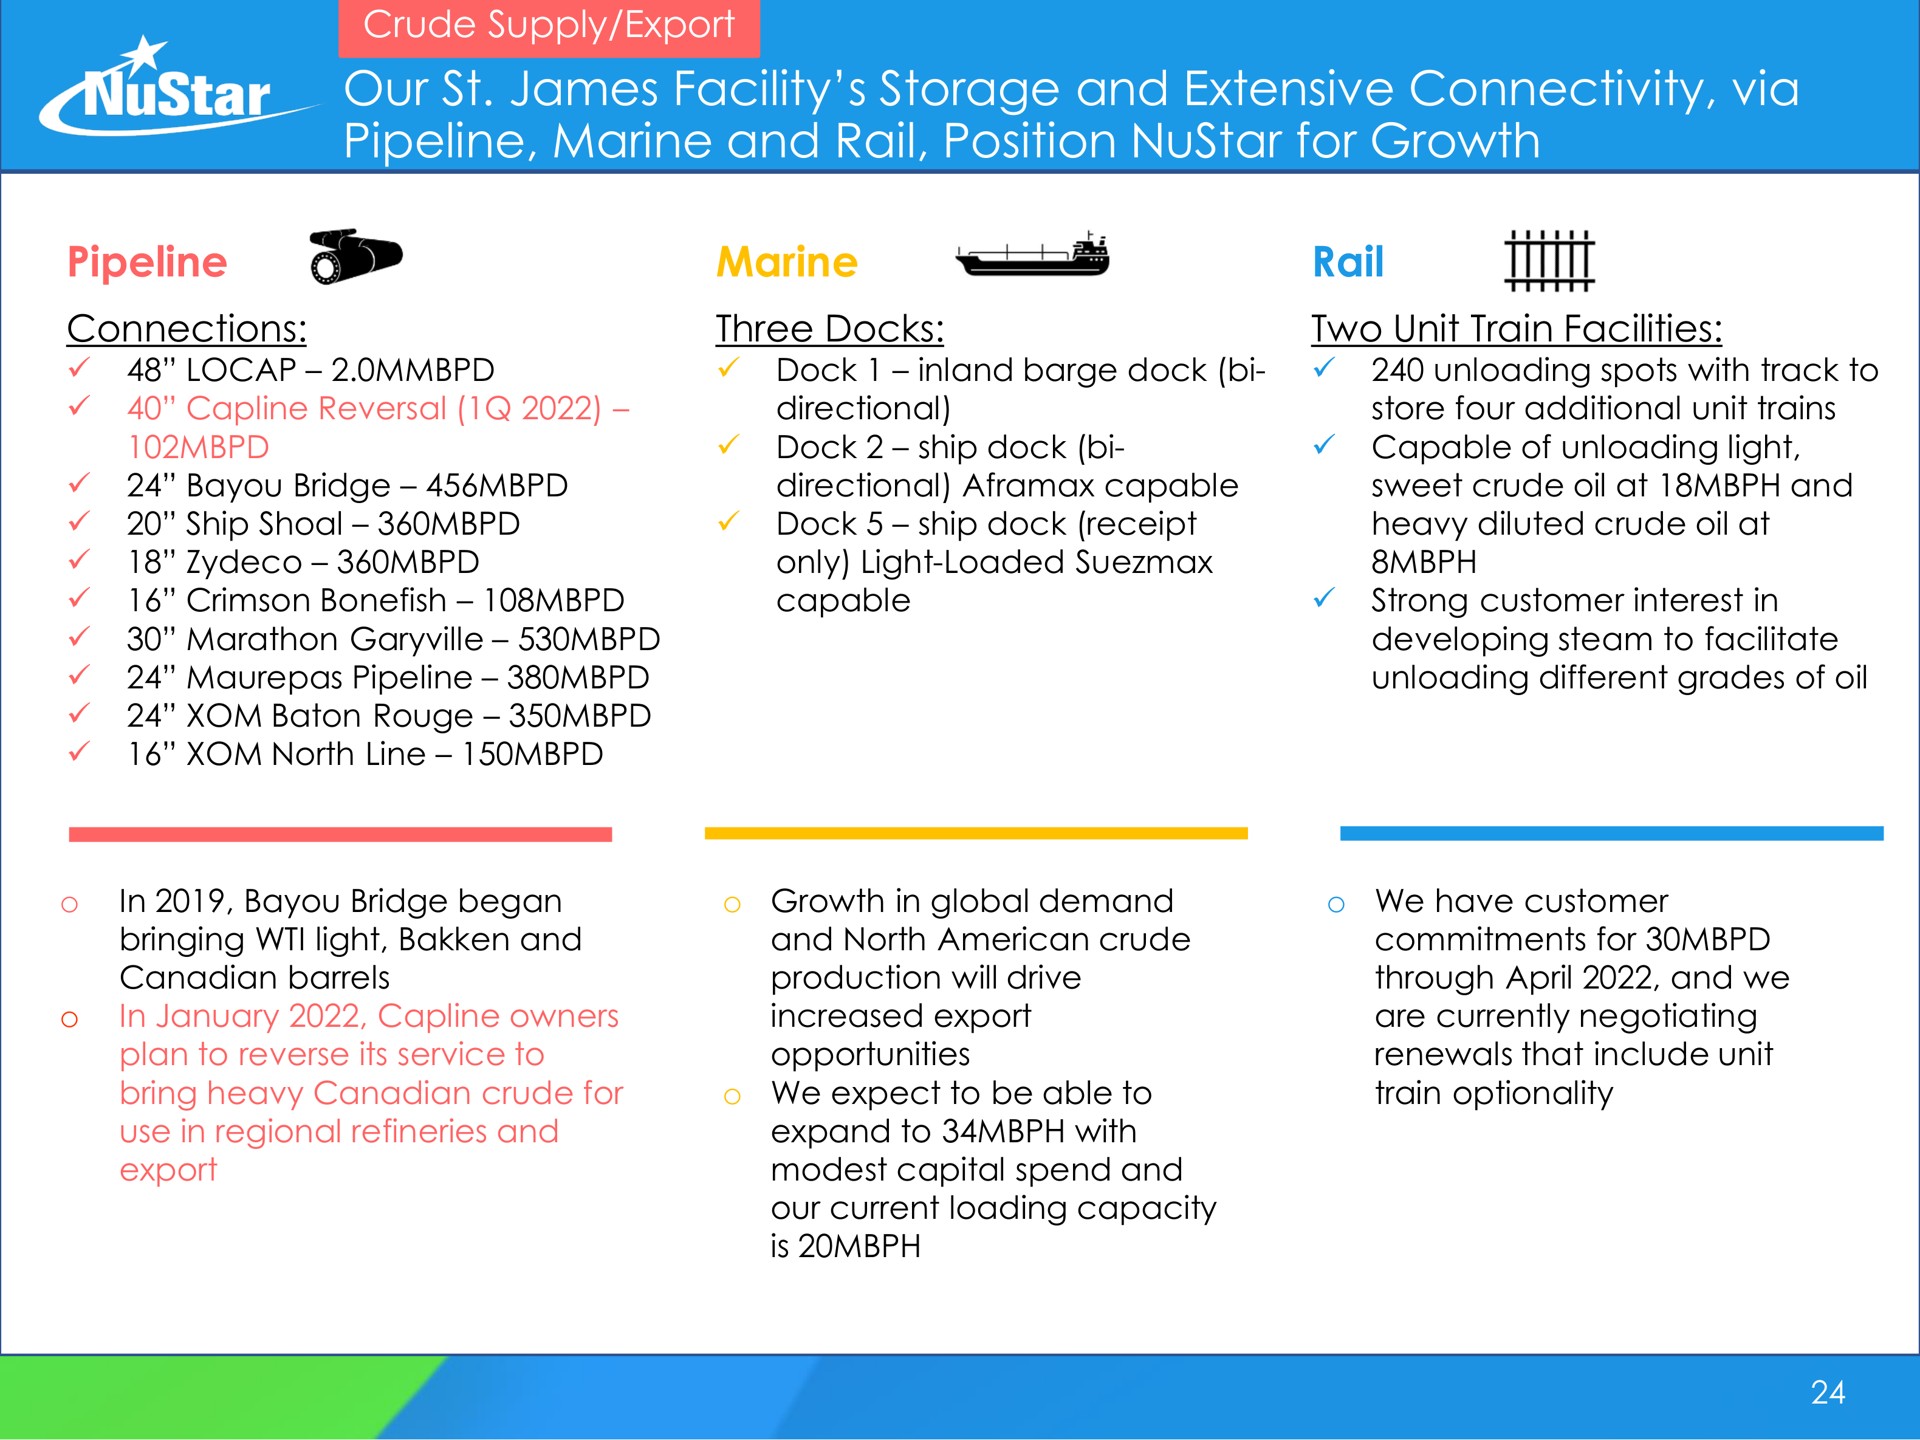 our james facility storage and extensive connectivity via pipeline marine and rail position for growth | NuStar Energy